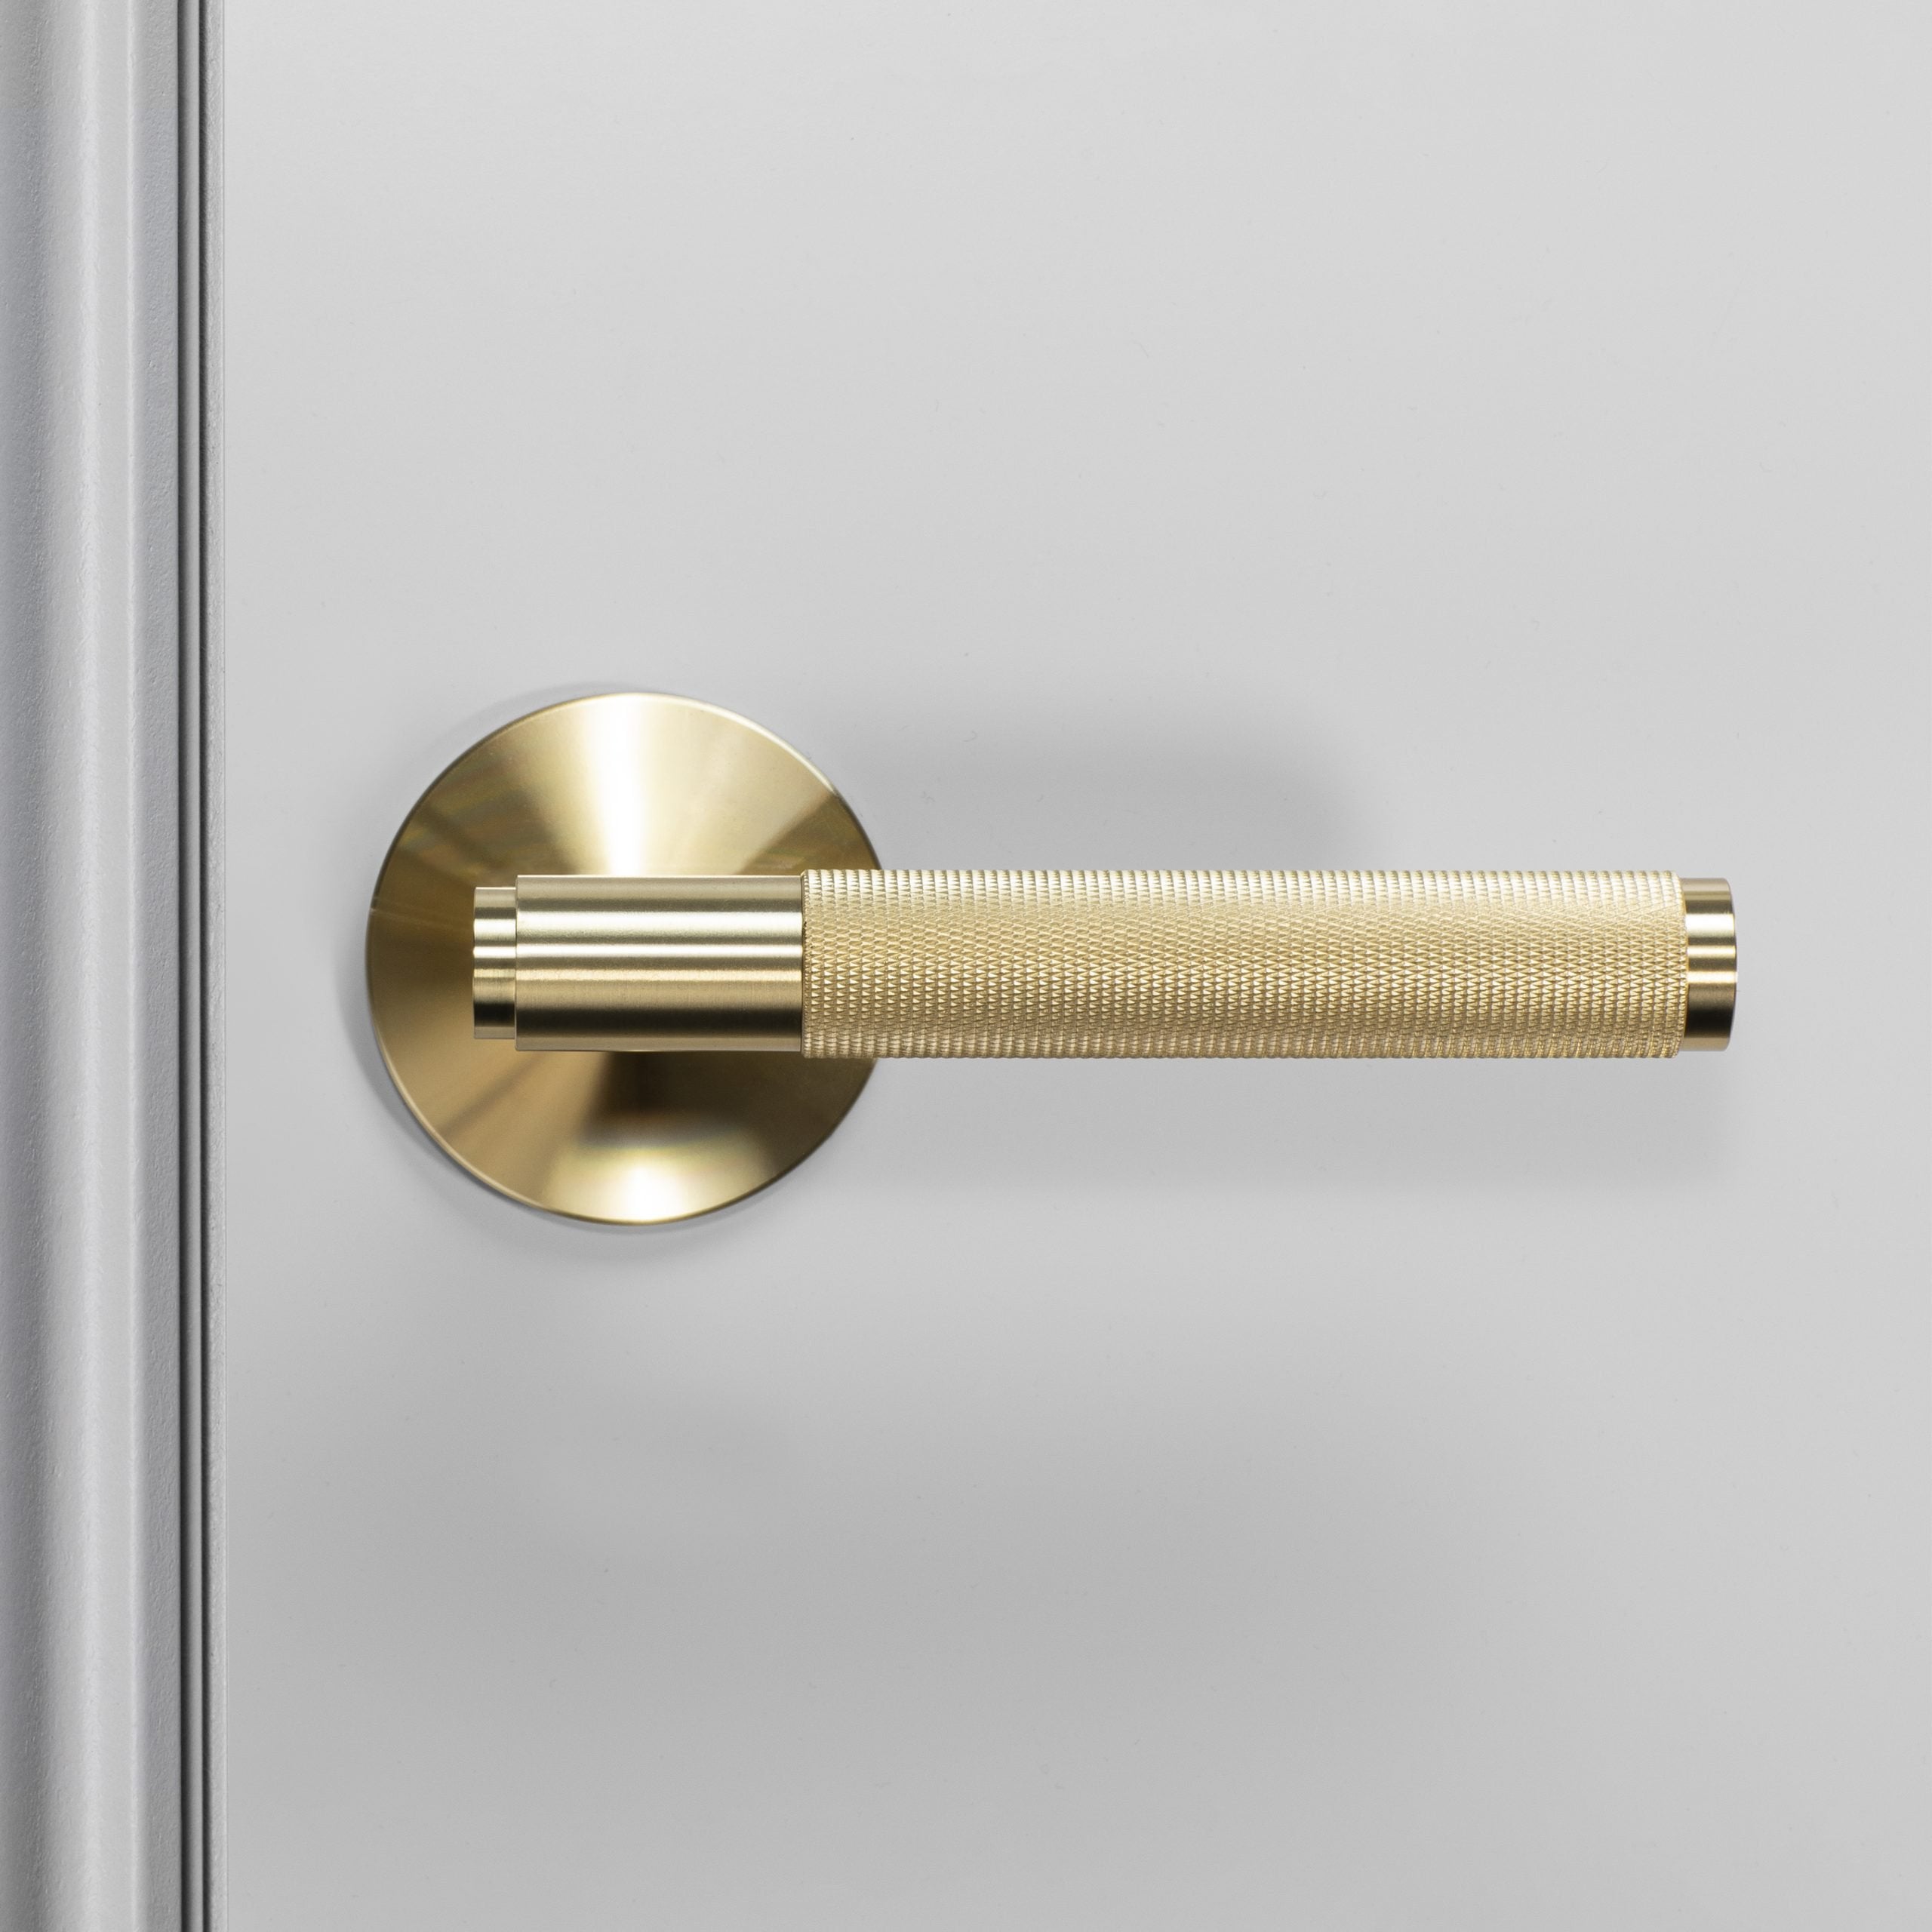 Buster + Punch Conventional Door Handle, Cross Design - PASSAGE TYPE Hardware Buster + Punch   